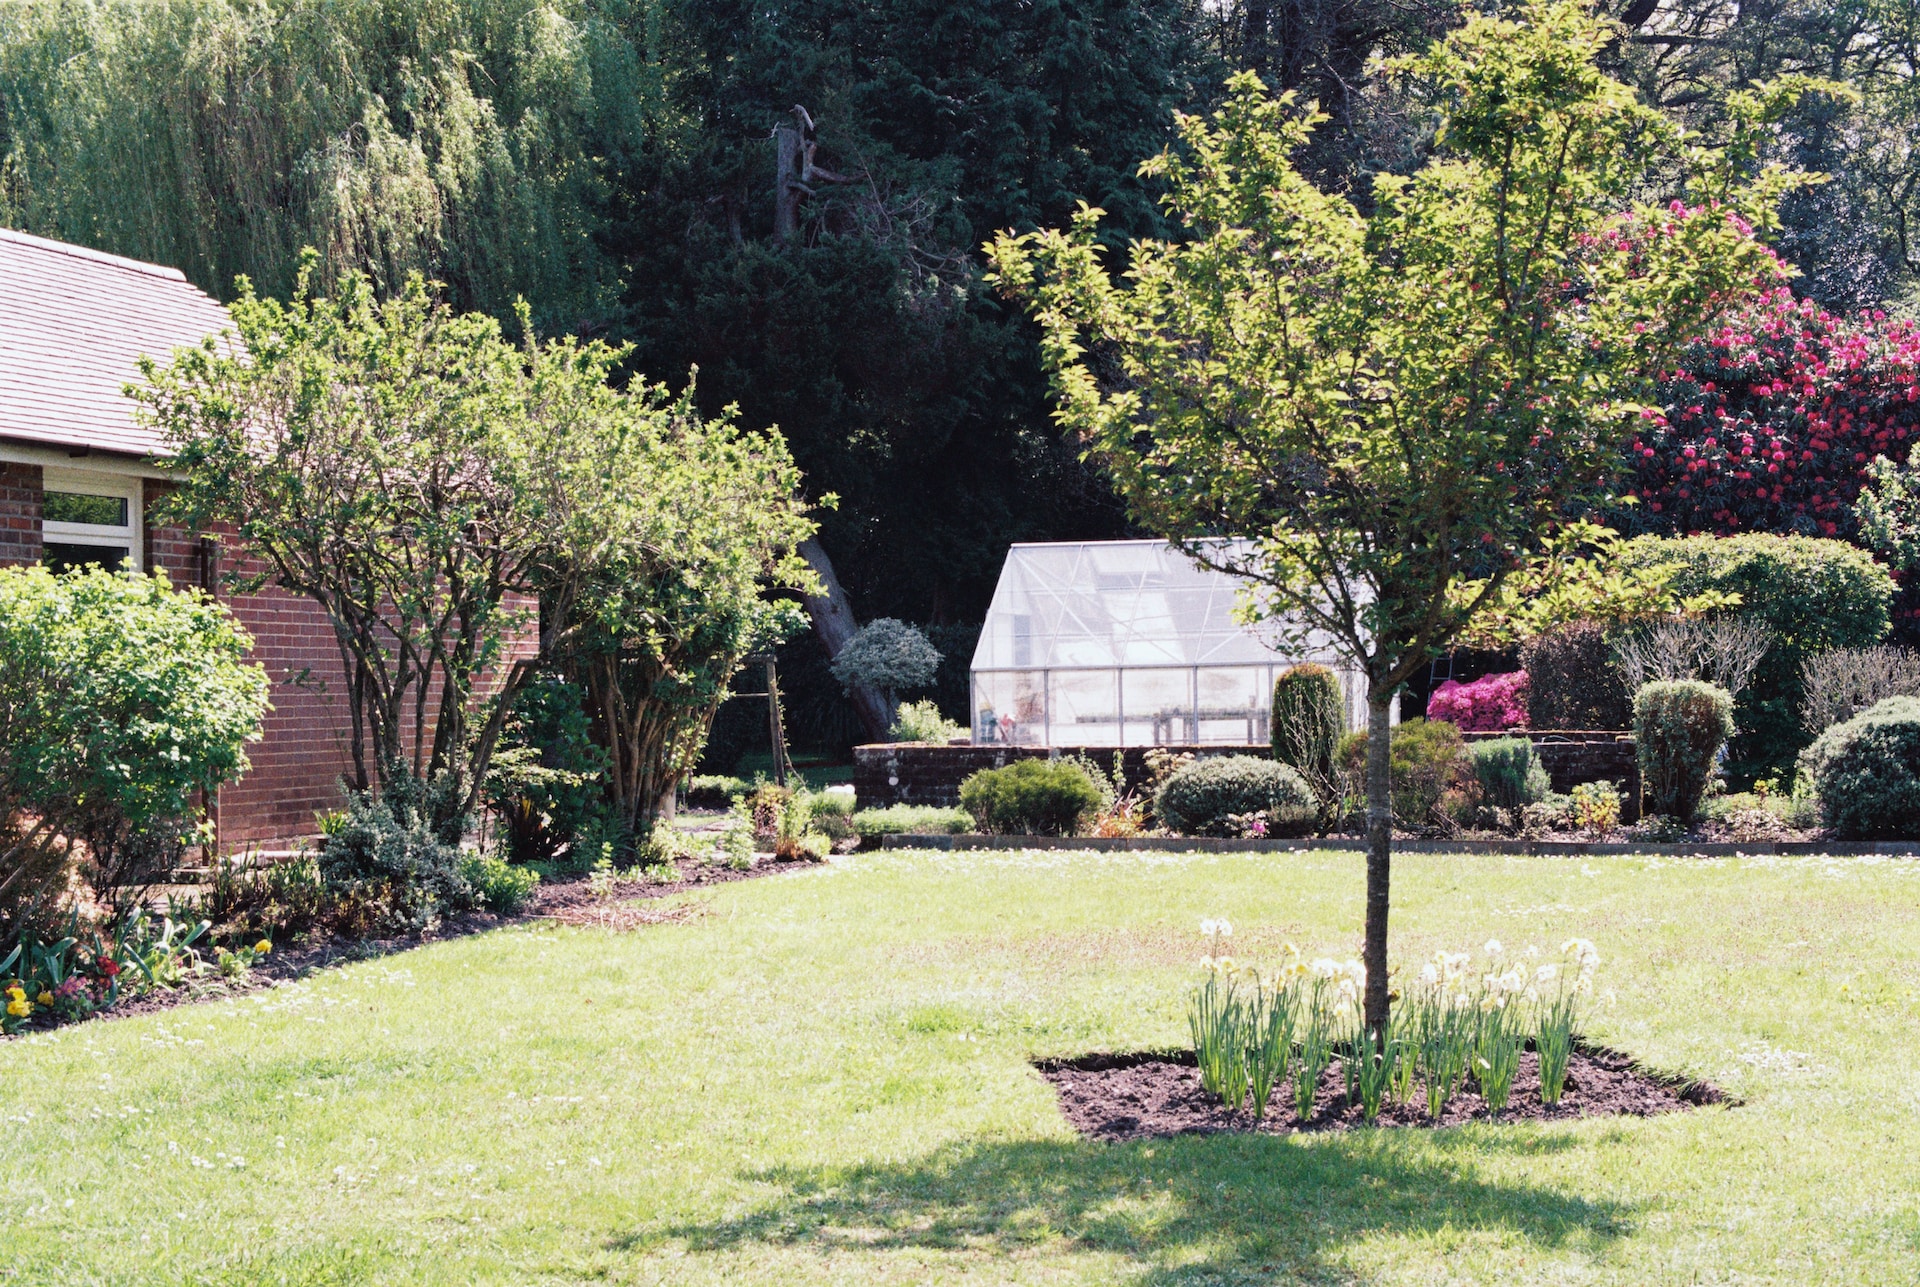 A landscaped garden with a lawn, flowers, shrubs and a greenhouse in the background.